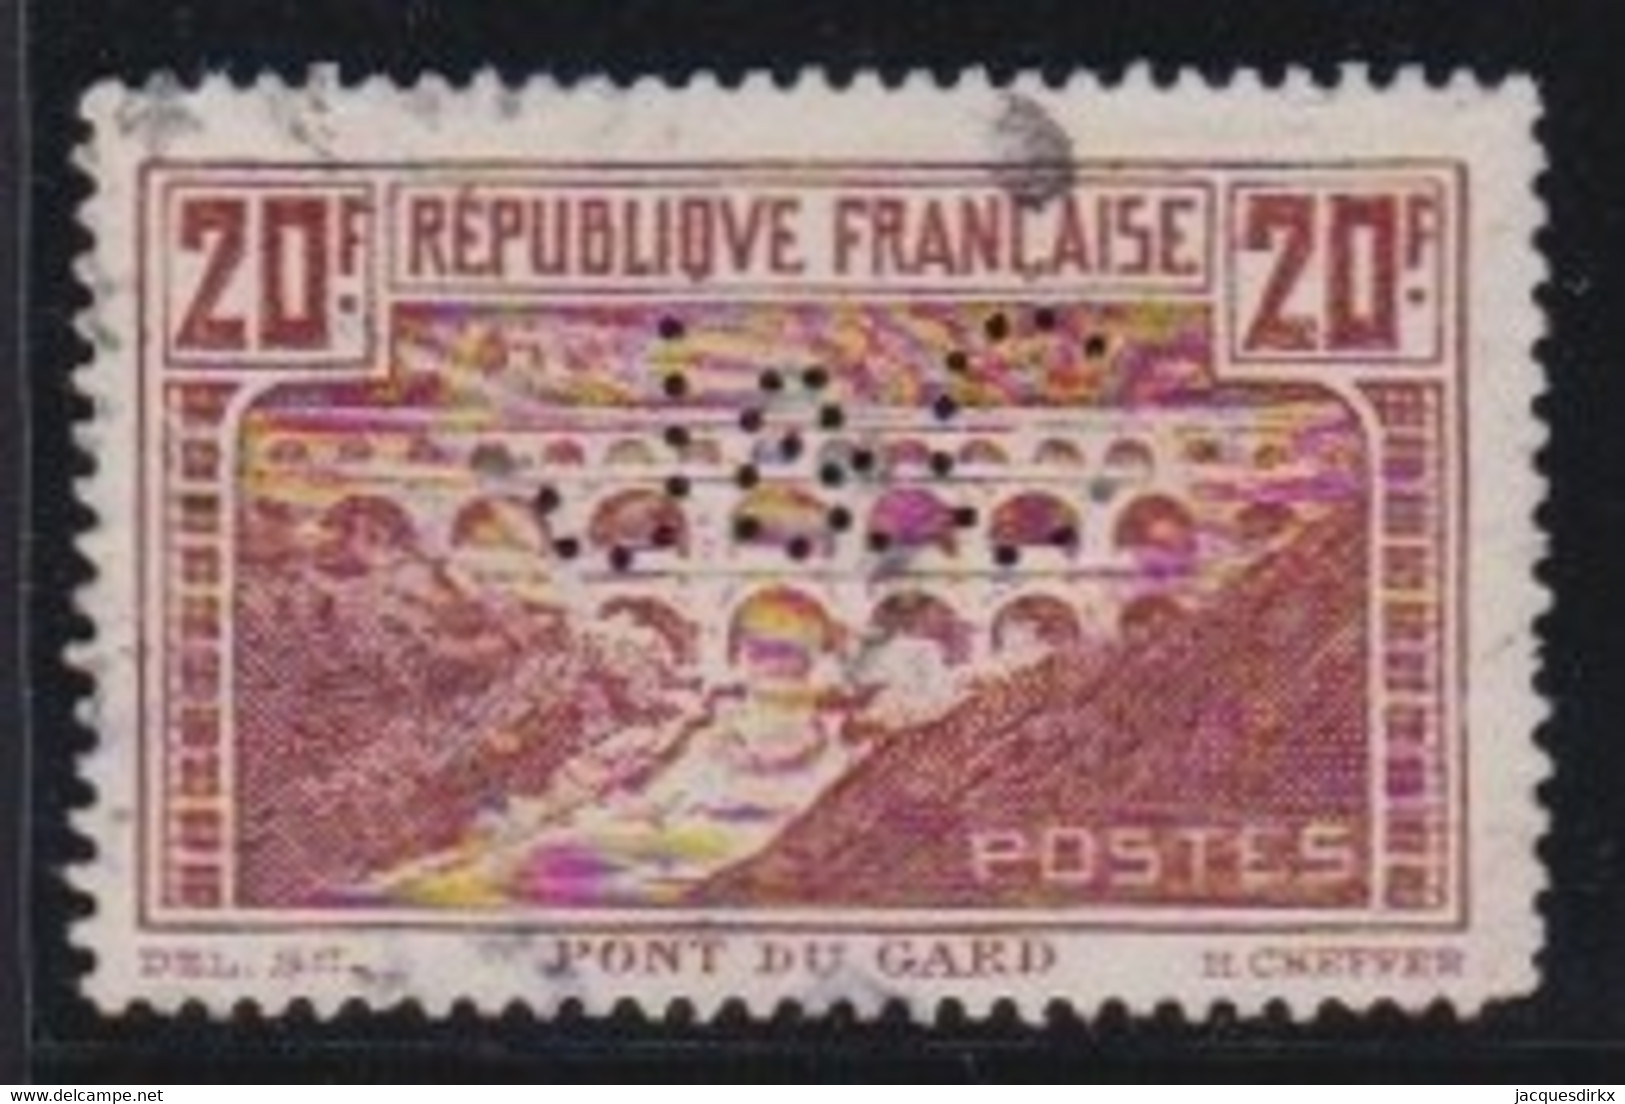 France   .   Y&T   .      262  Perf.         .    O         .    Oblitéré - Used Stamps